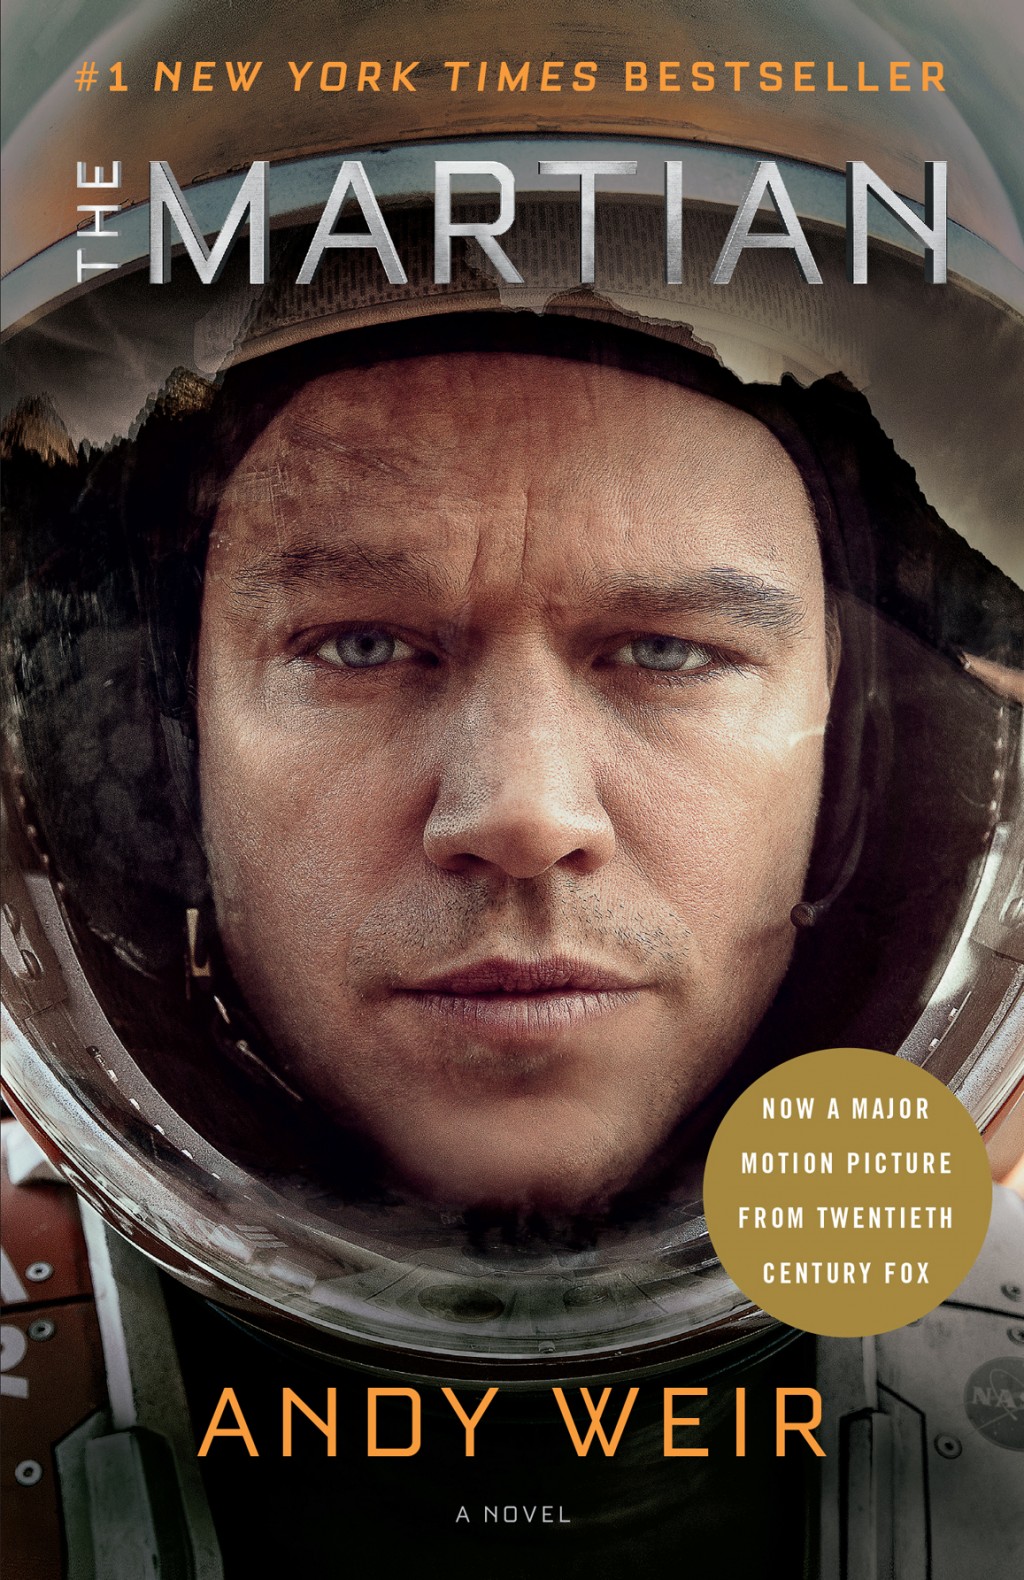 randomize by andy weir